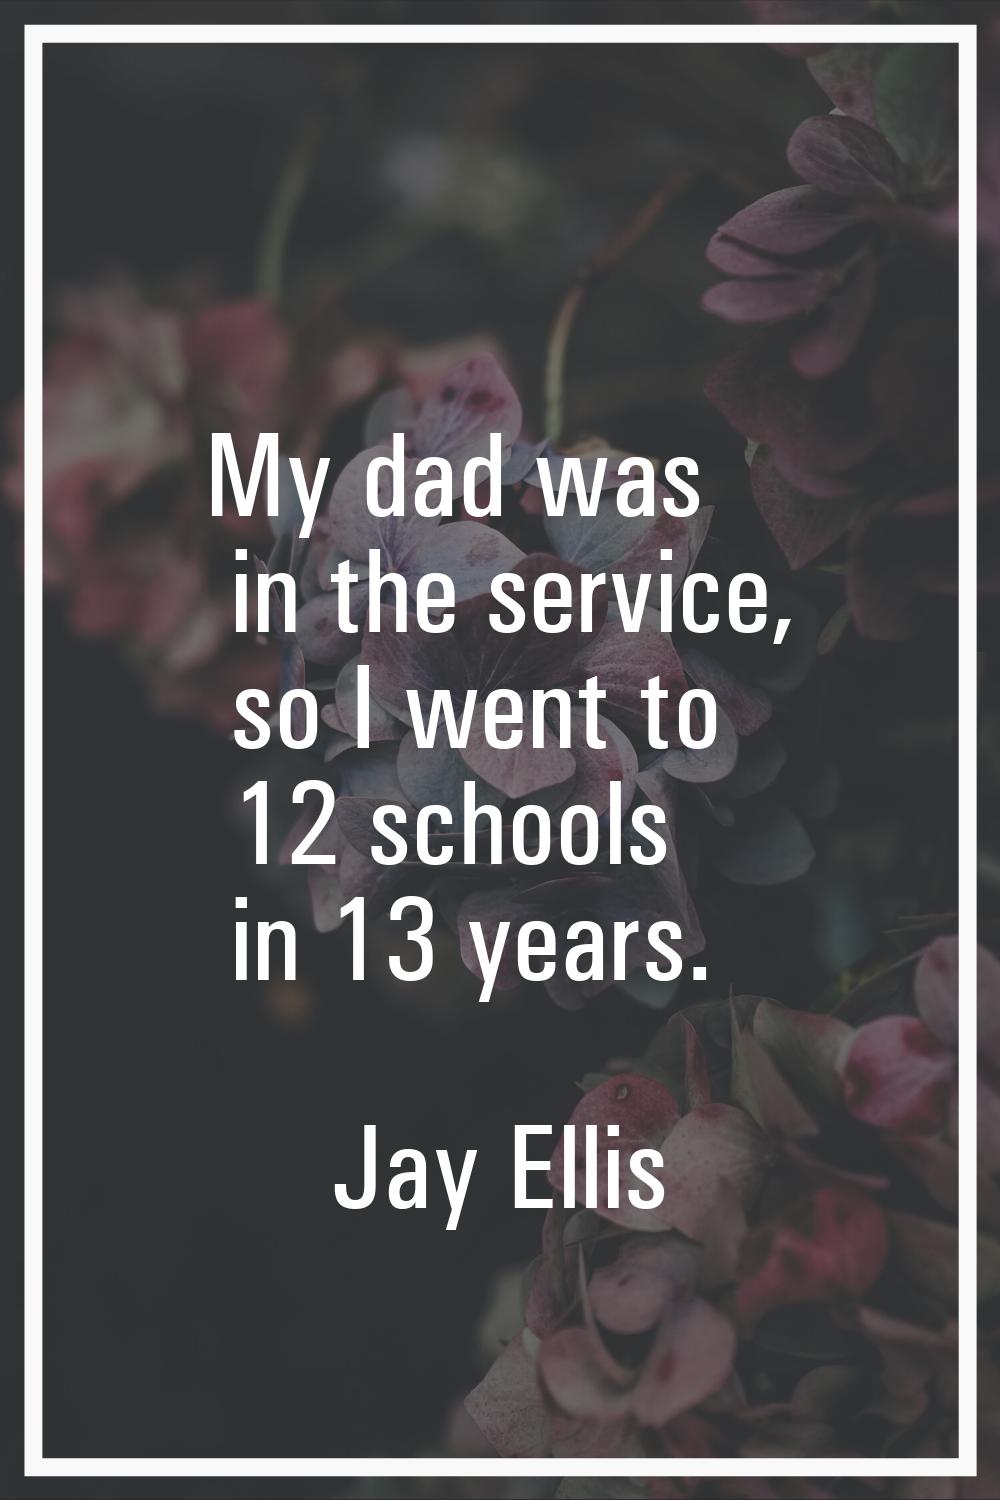 My dad was in the service, so I went to 12 schools in 13 years.